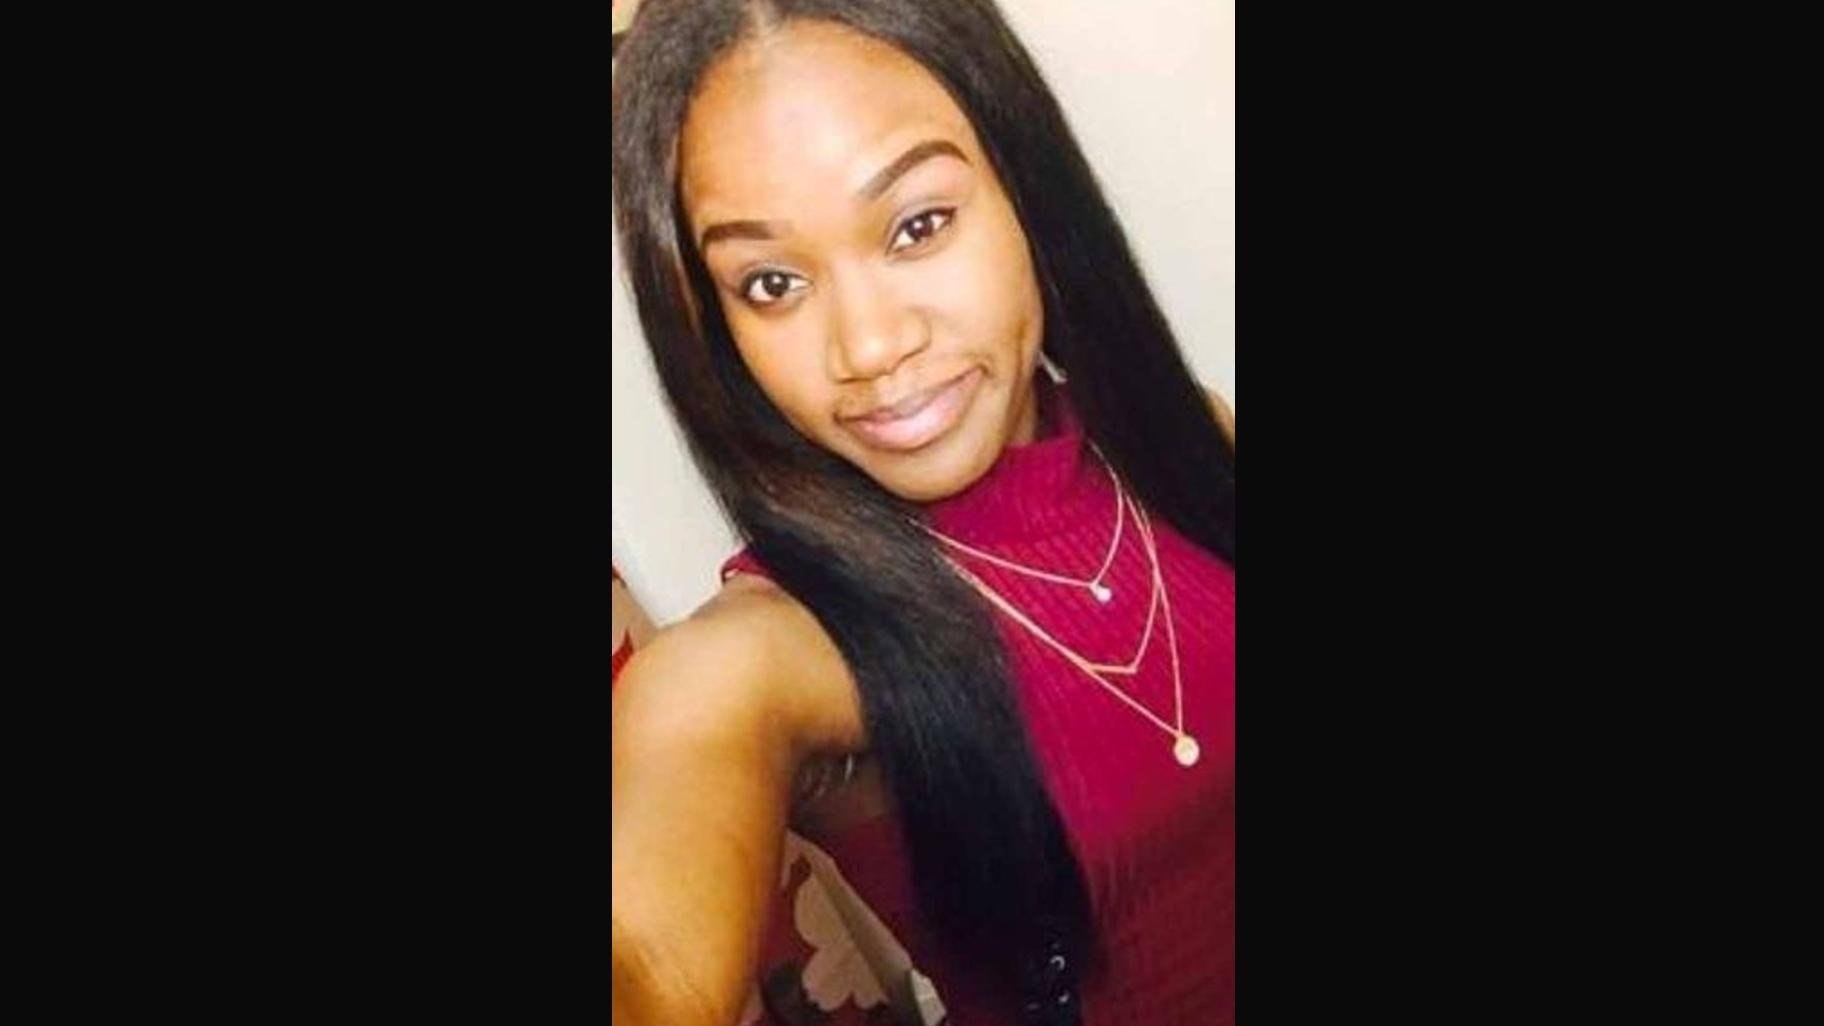 Kierra Coles has been missing since 2018. (Submitted)